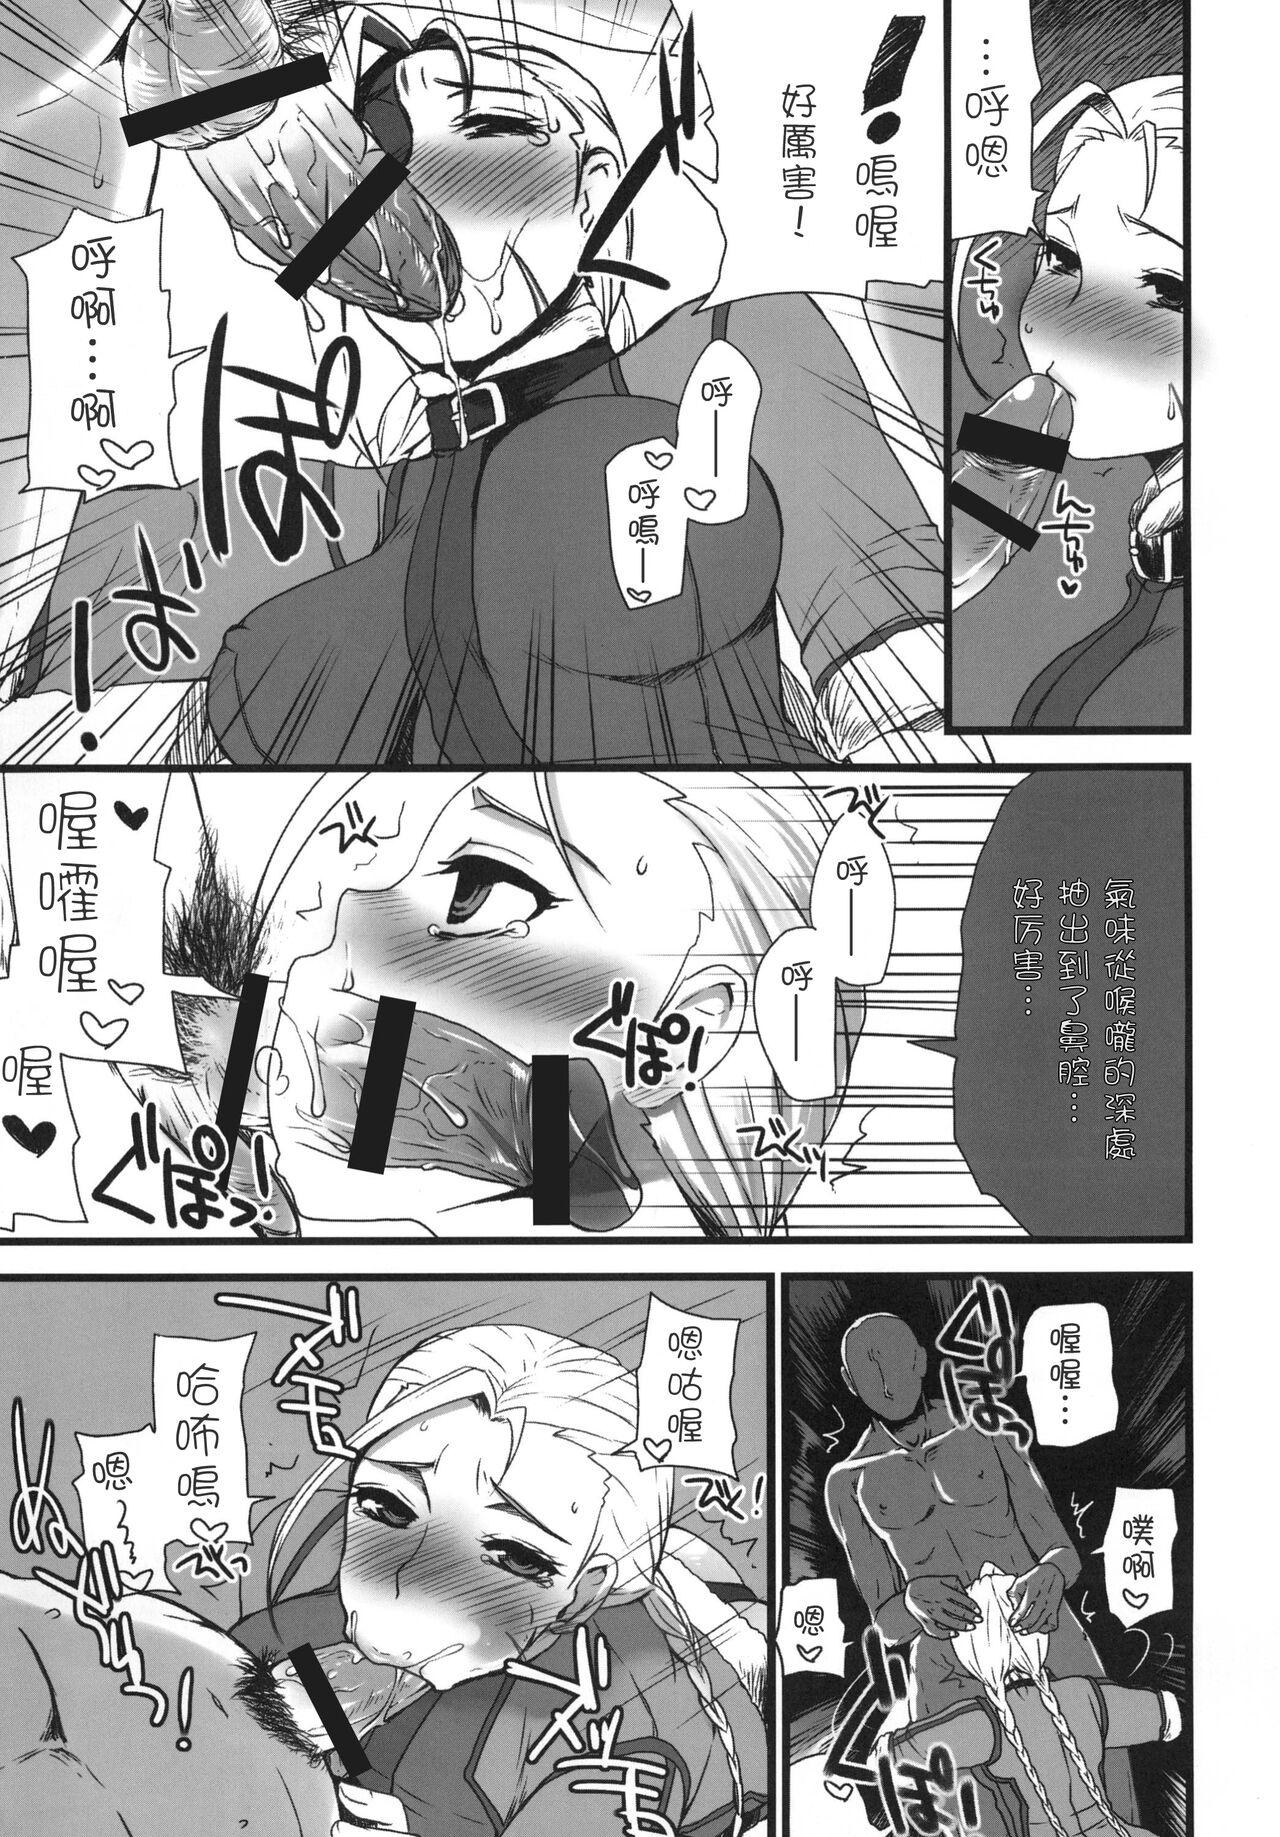 Sex Massage Mona-Lisa Overdrive | 重啟蒙娜麗莎 - Street fighter Gay Domination - Page 7